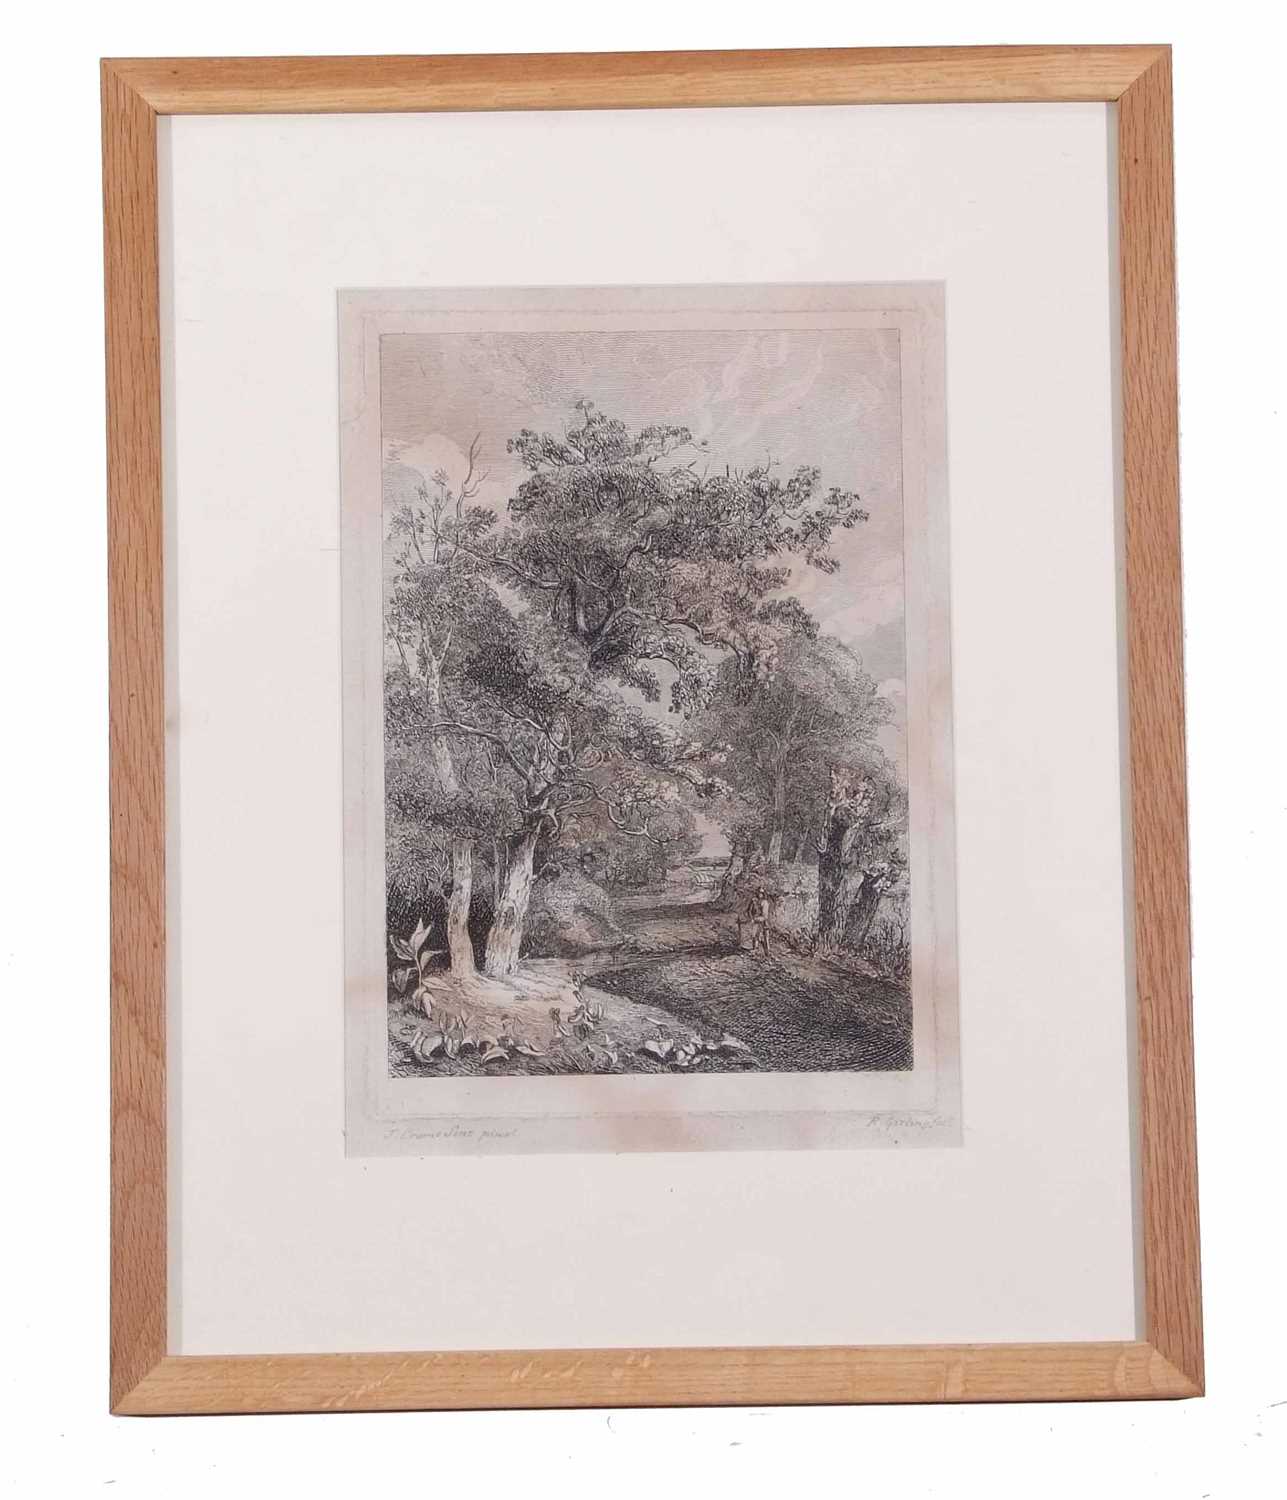 John Crome (British, 1768-1821), A woodland scene with a figure along a path, etching on paper, - Image 2 of 2